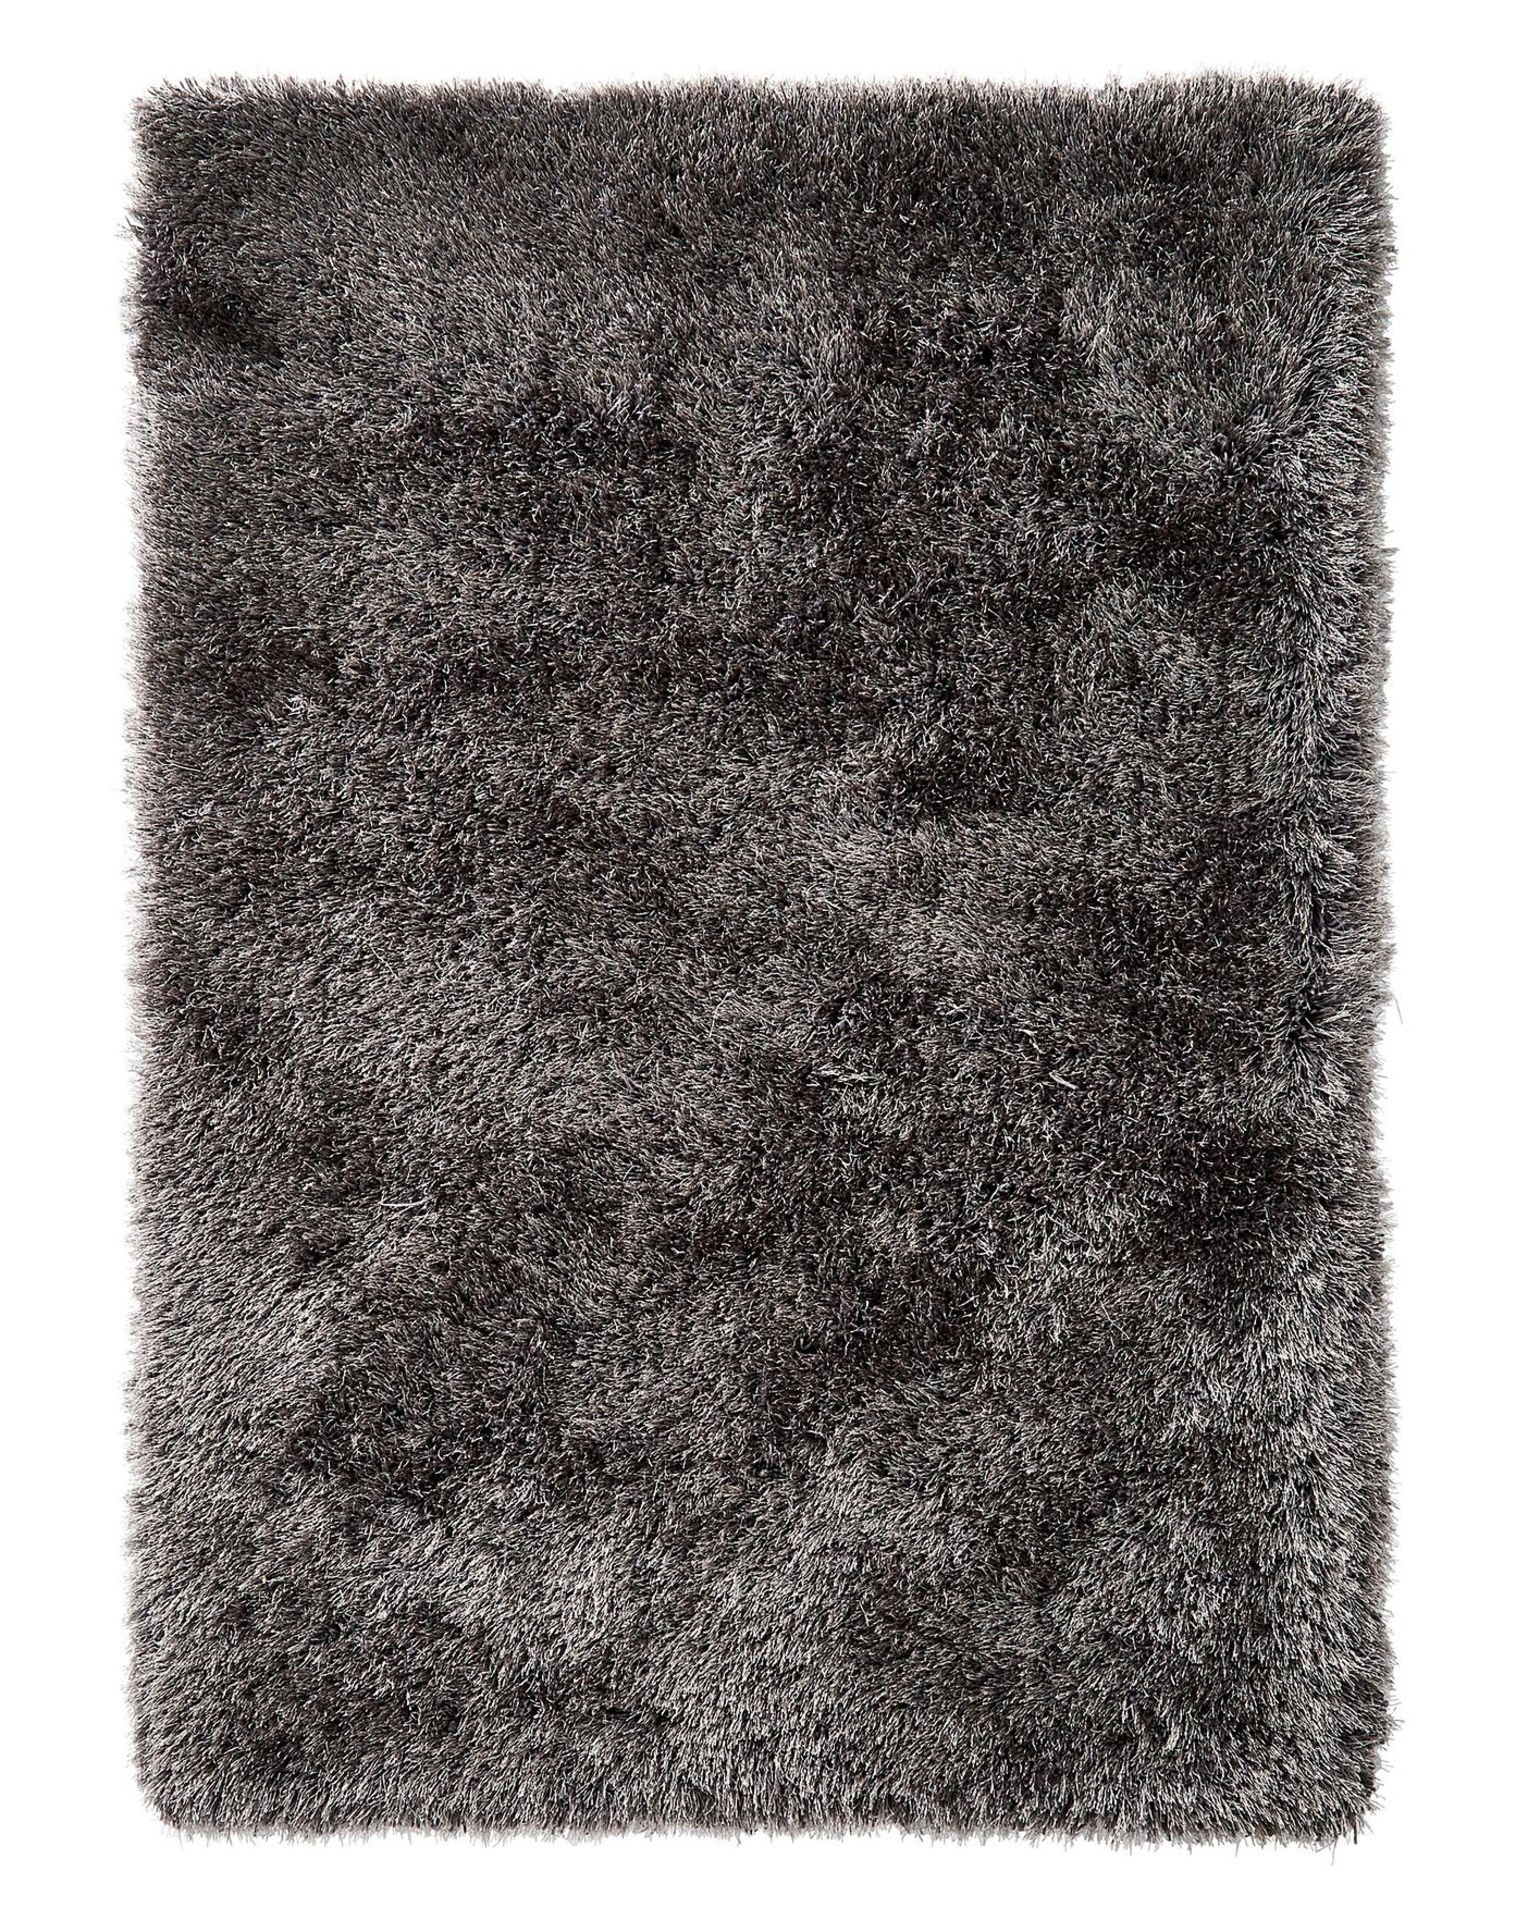 BAGGED INDULGENCE RUG IN CHARCOAL 120X170 RRP £49.99Condition ReportAppraisal Available on